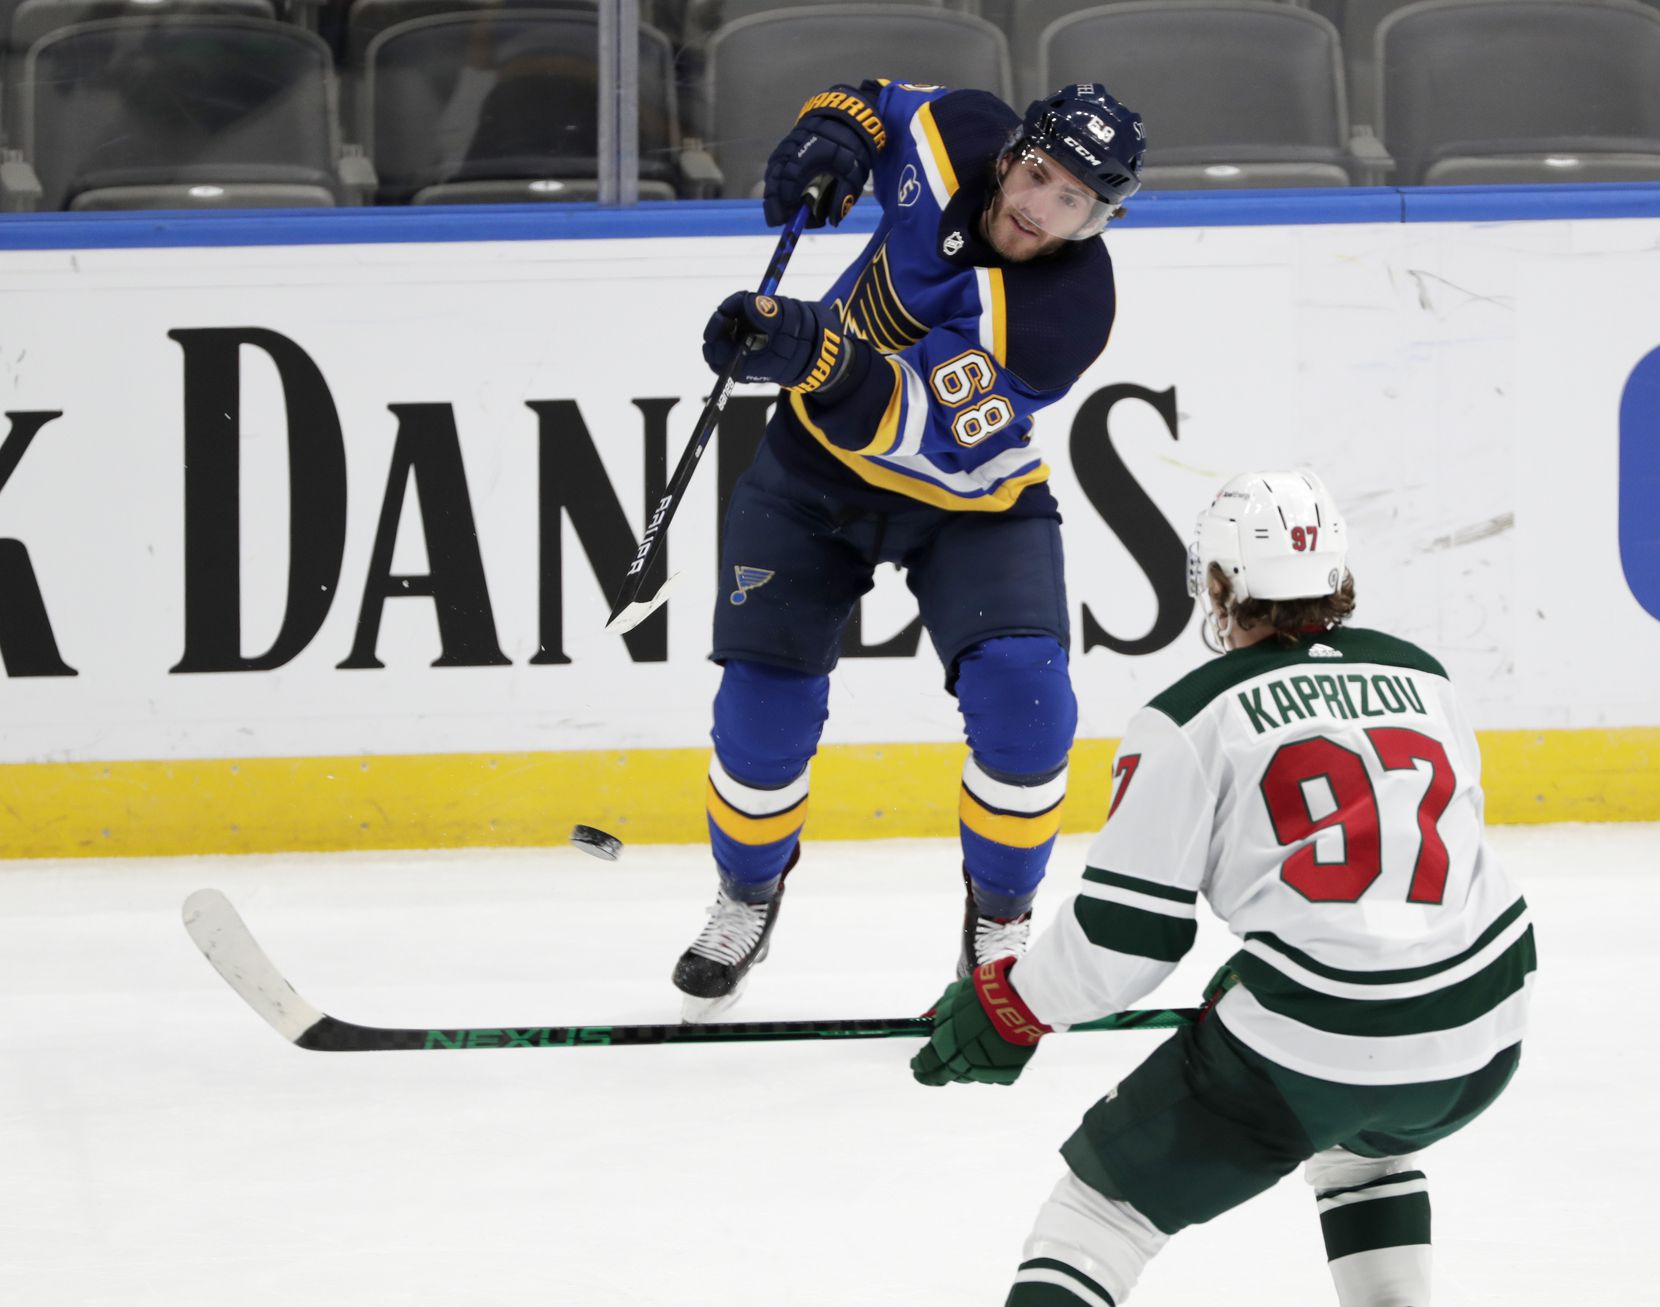 St. Louis Blues' Mike Hoffman (68) flips the puck past Minnesota Wild's Kirill Kaprizov (97) in the third period of an NHL hockey game, Wednesday, May 12, 2021 in St. Louis. The Blues beat the Wild 4-0.